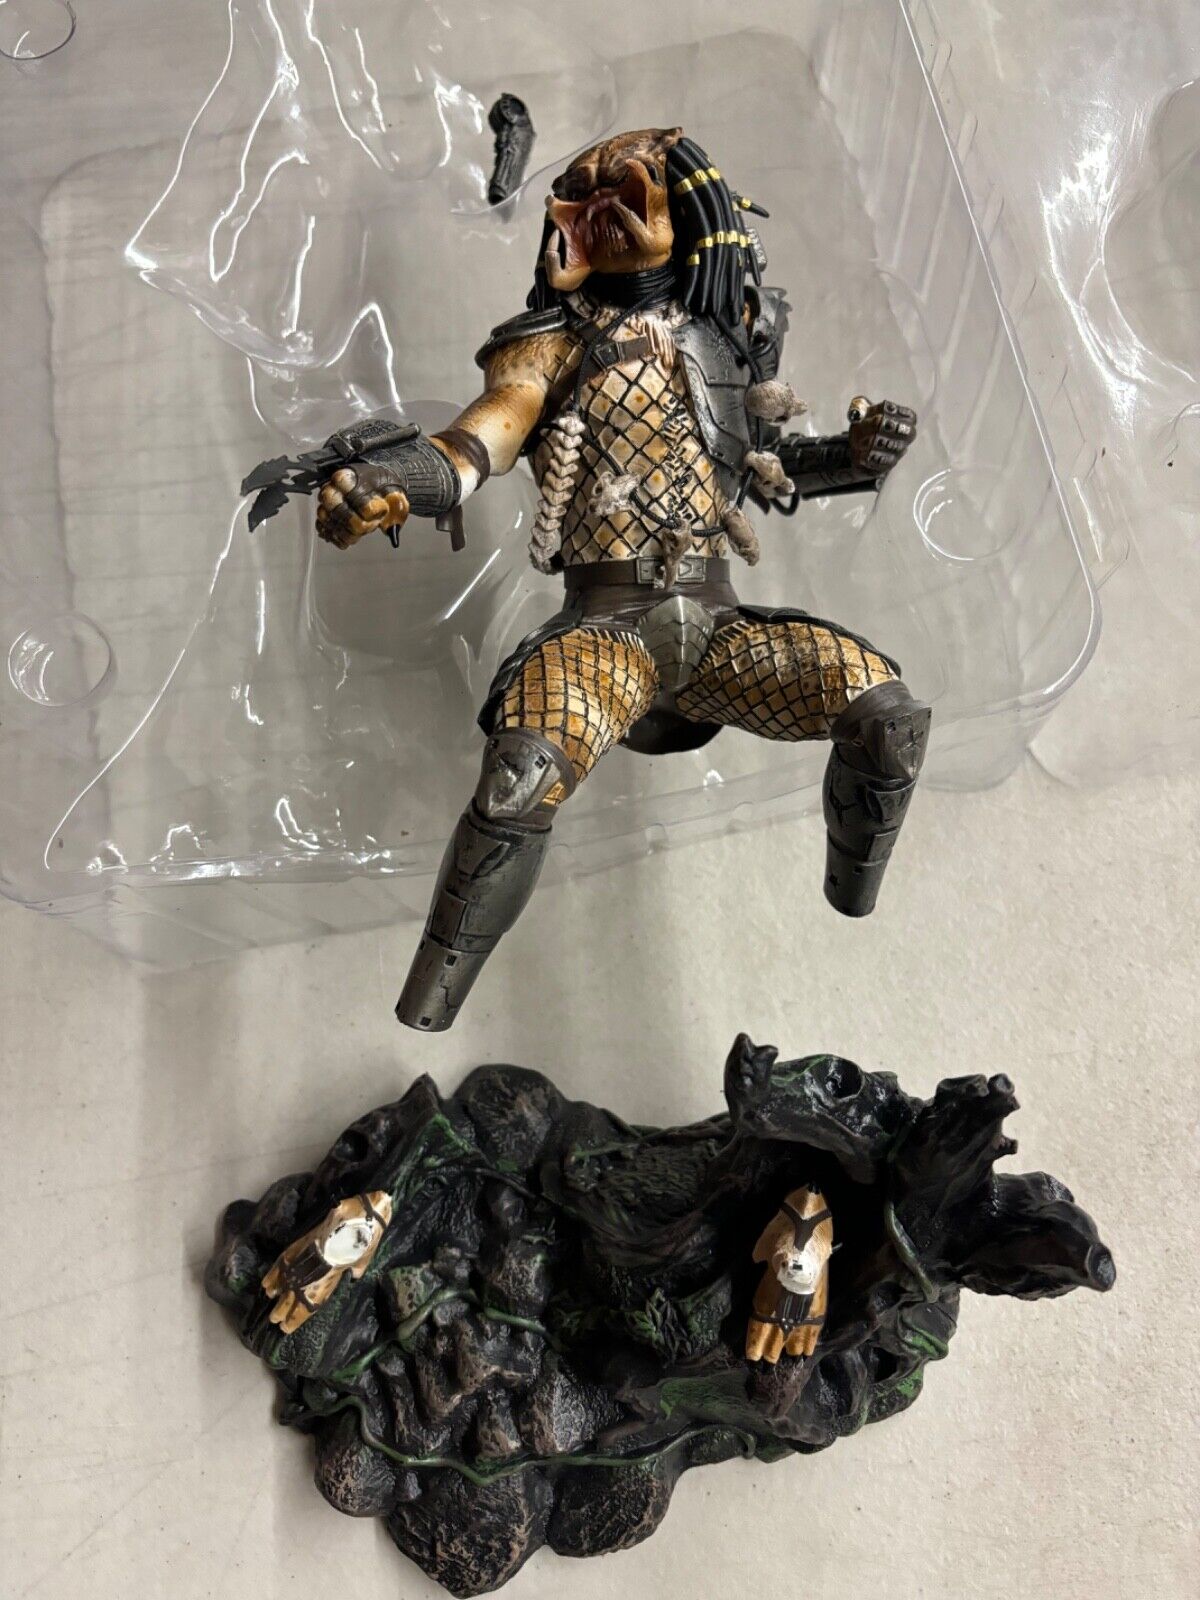 Diamond Select Toys SDCC 2020 Gallery Unmasked Predator Statue Exclusive DAMAGED